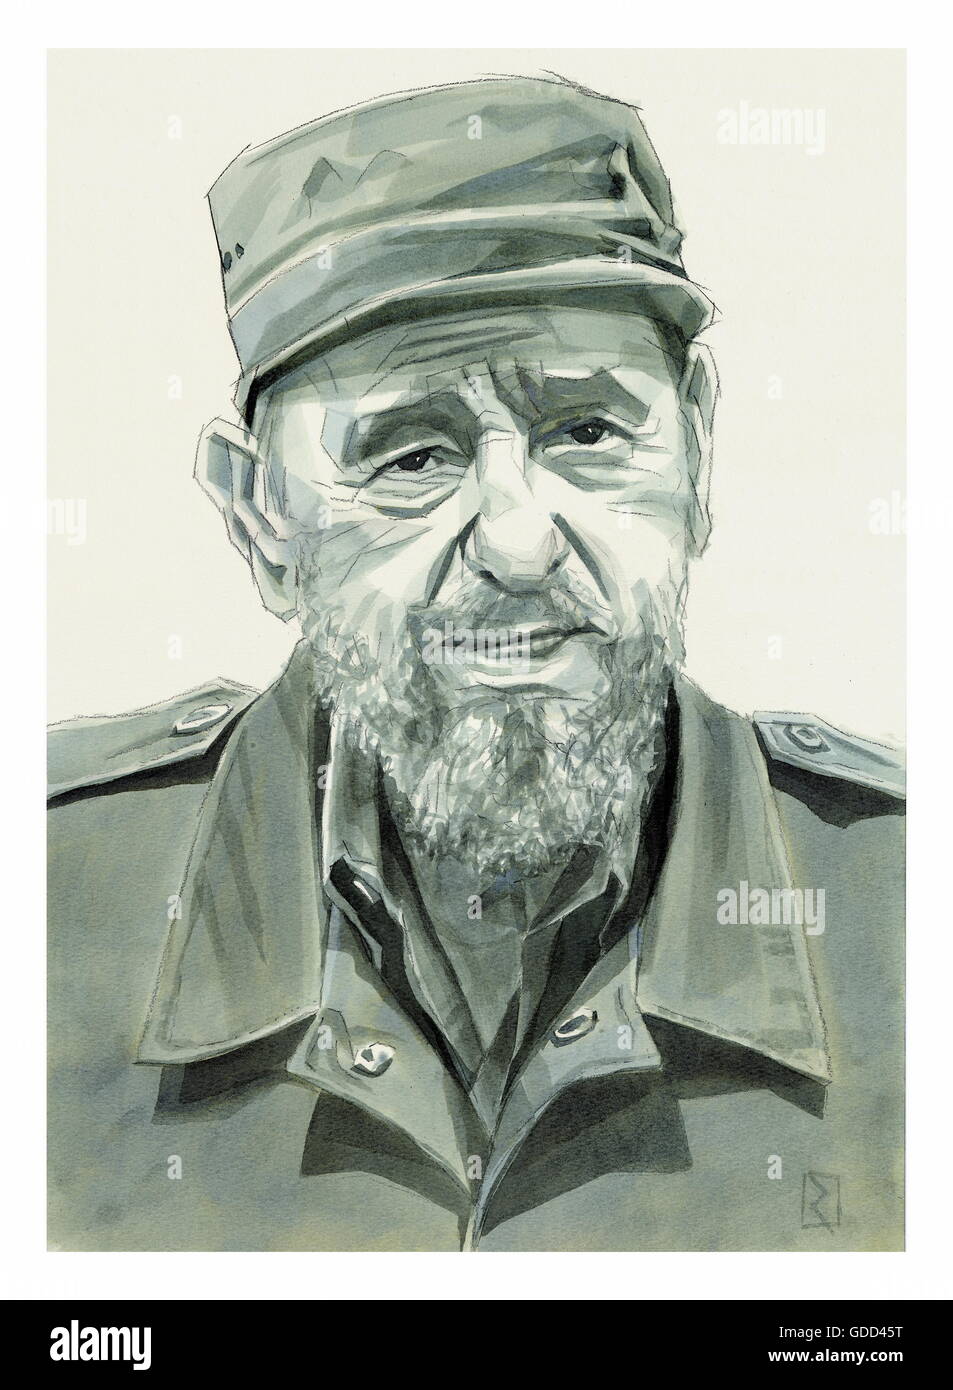 Castro Ruz, Fidel, * 13.8.1926, Cuban politician and statesman, portrait, monochrome drawing with hat by Jan Rieckhoff, 19.7.2012, Artist's Copyright already cleared through INTERFOTO, no additional clearance necessary Stock Photo